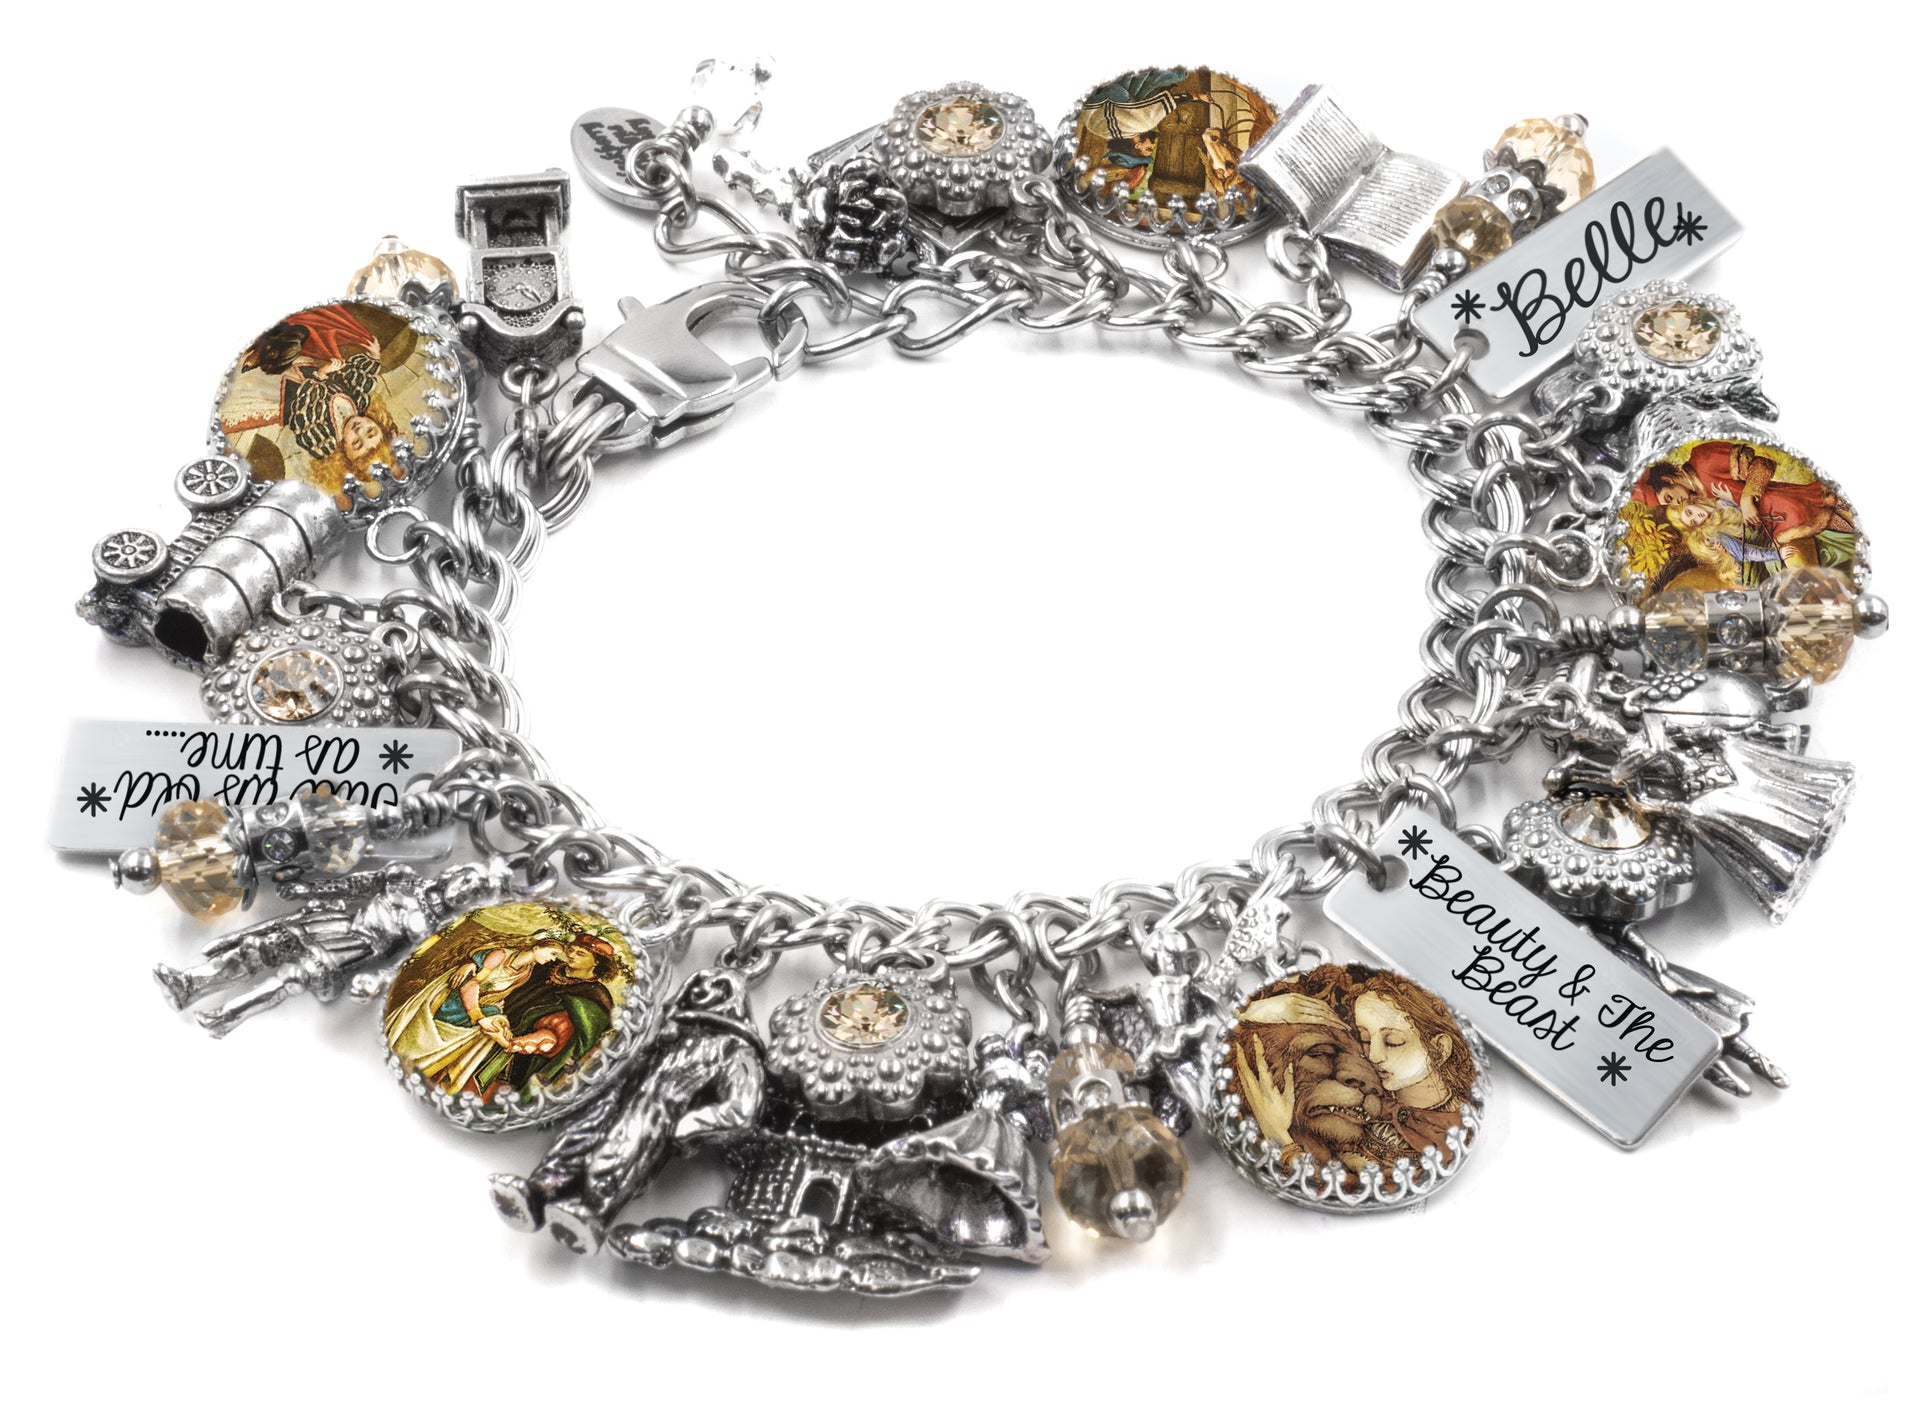 Beauty and The Beast + Stainless Steel + Charm Bracelets